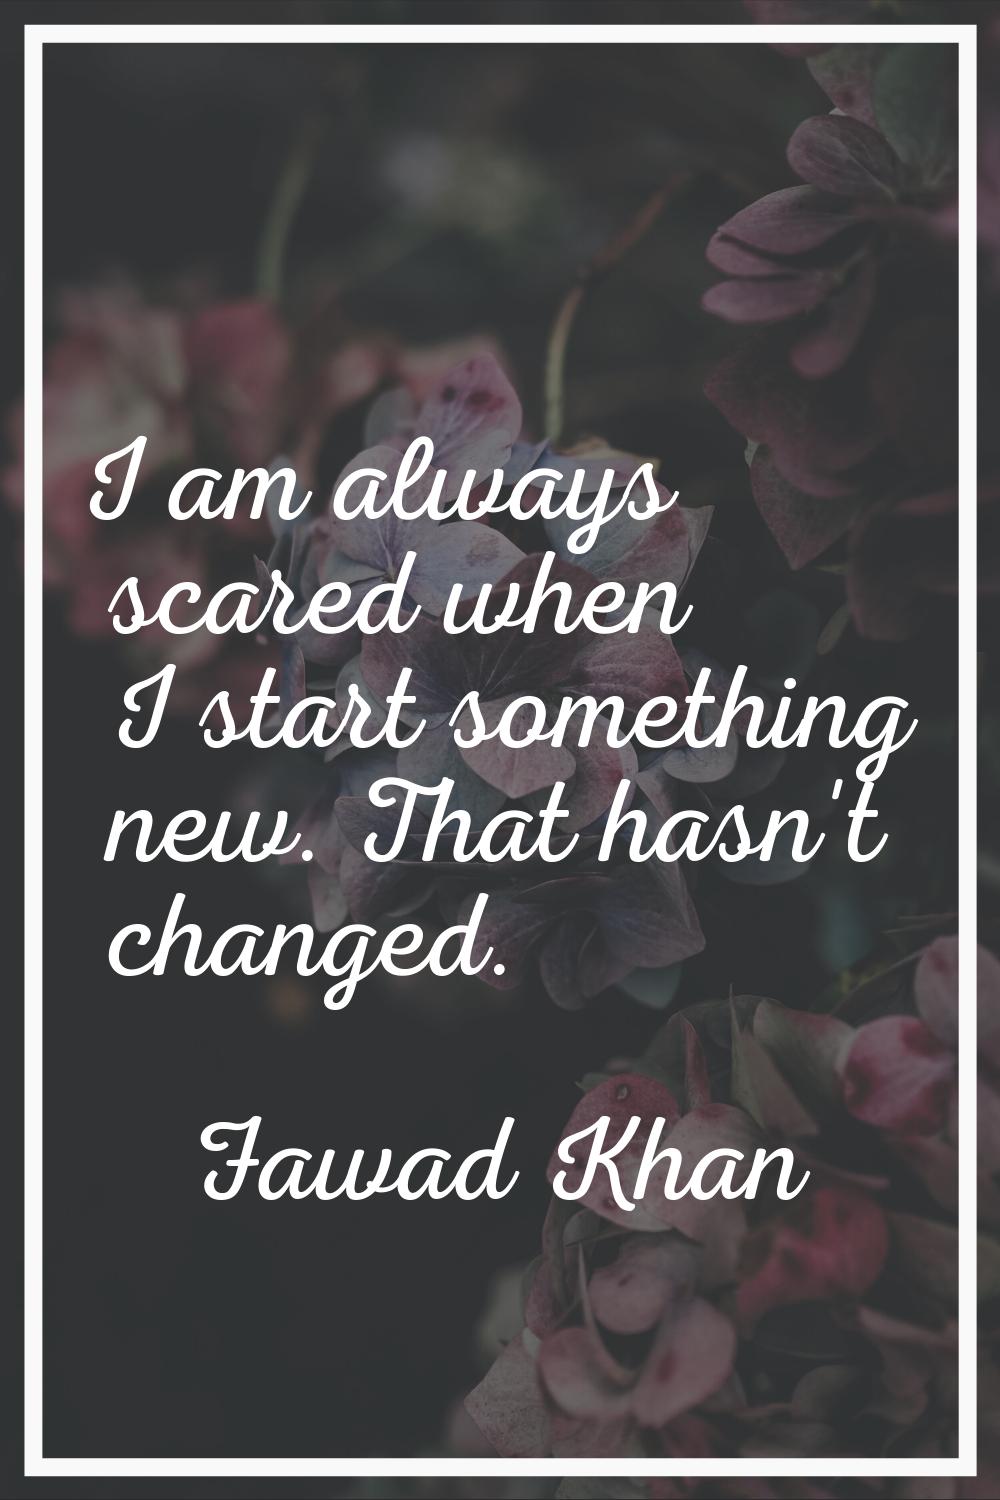 I am always scared when I start something new. That hasn't changed.